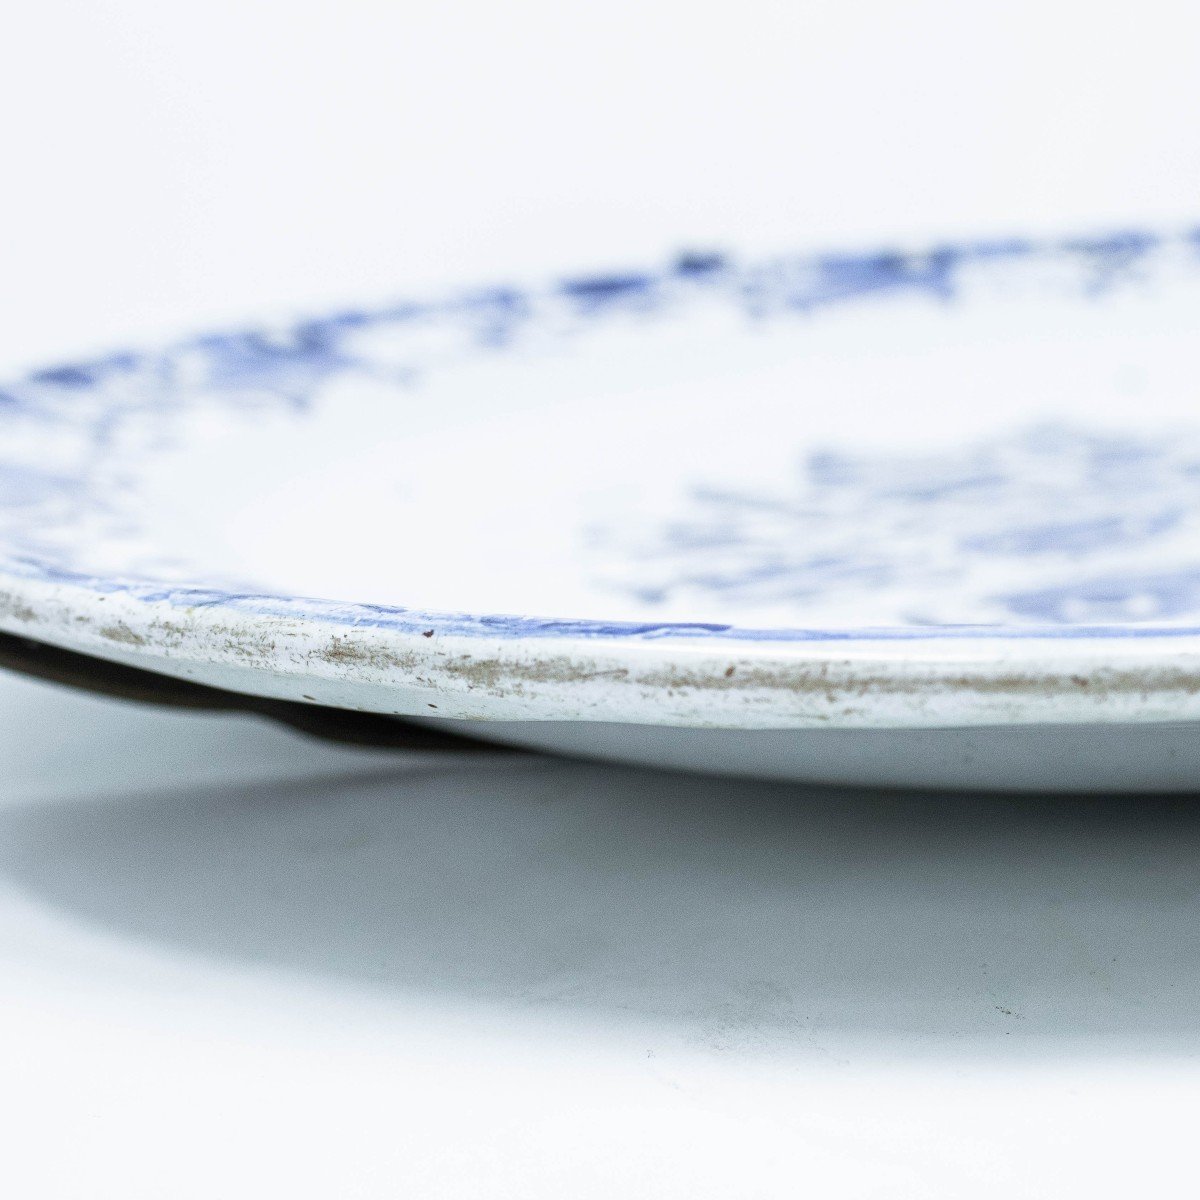 Manufacture Antonibon From The 18th Century, Dish-photo-7